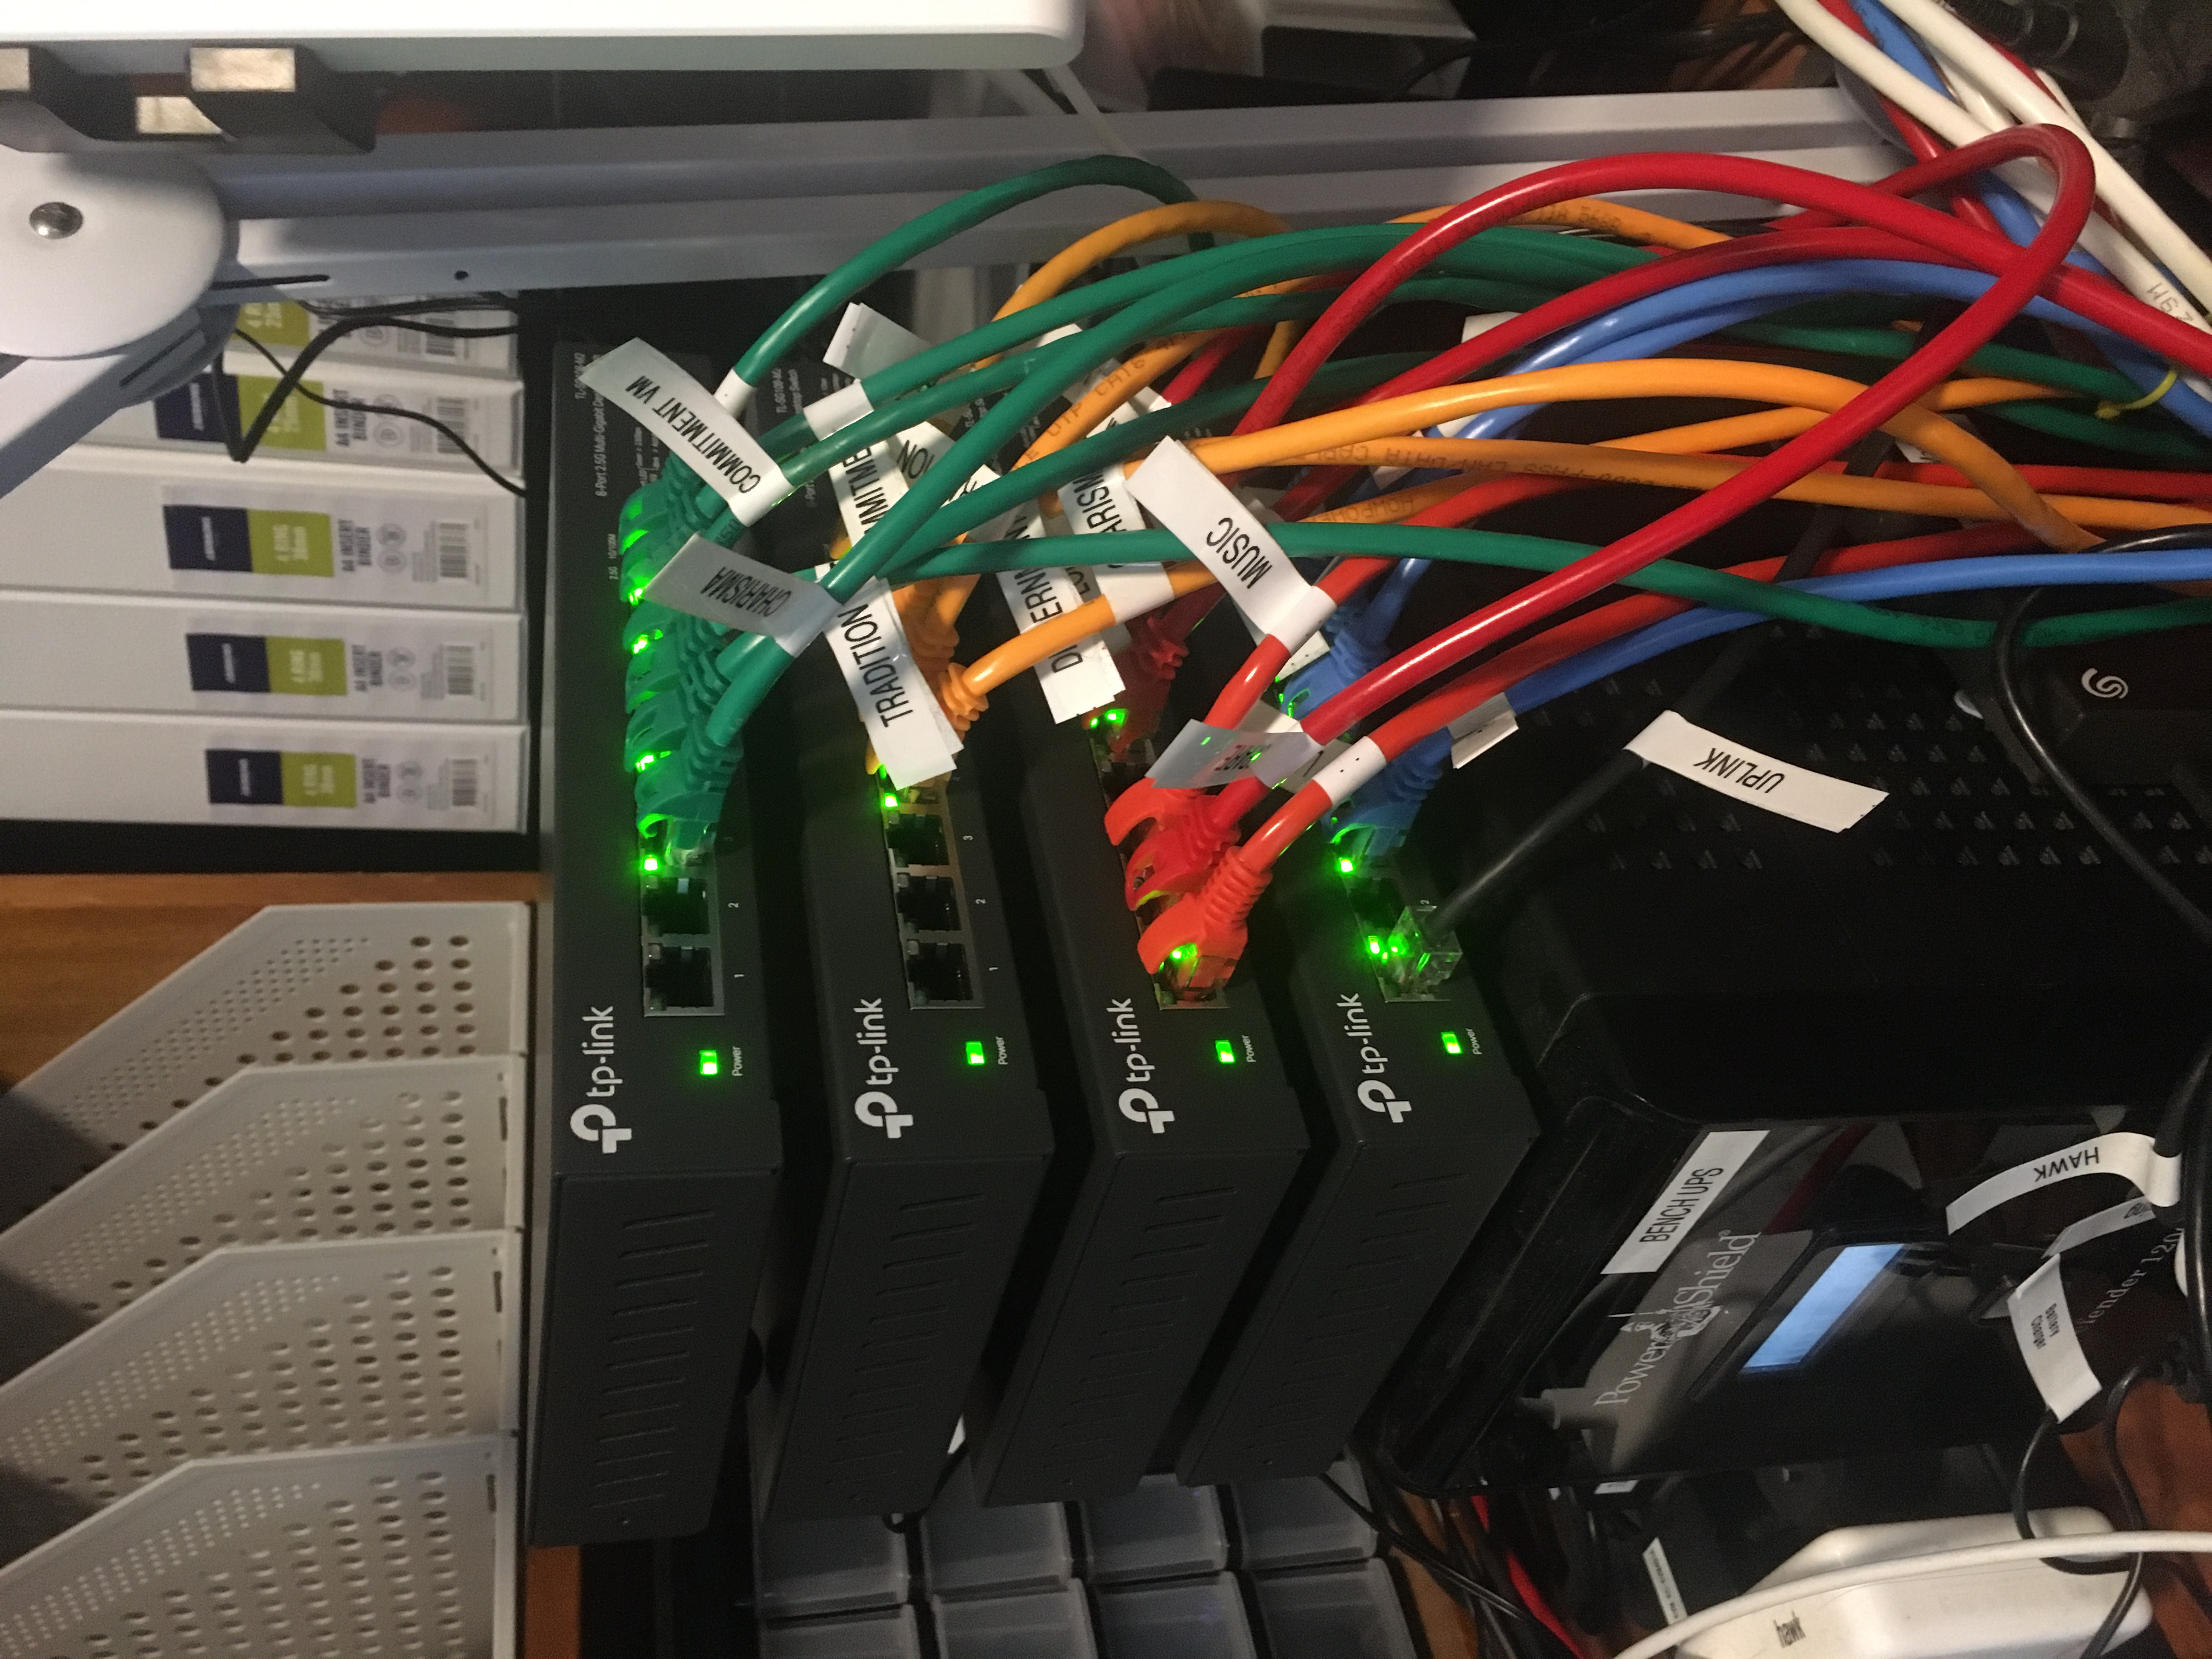 John's four new Ethernet switches